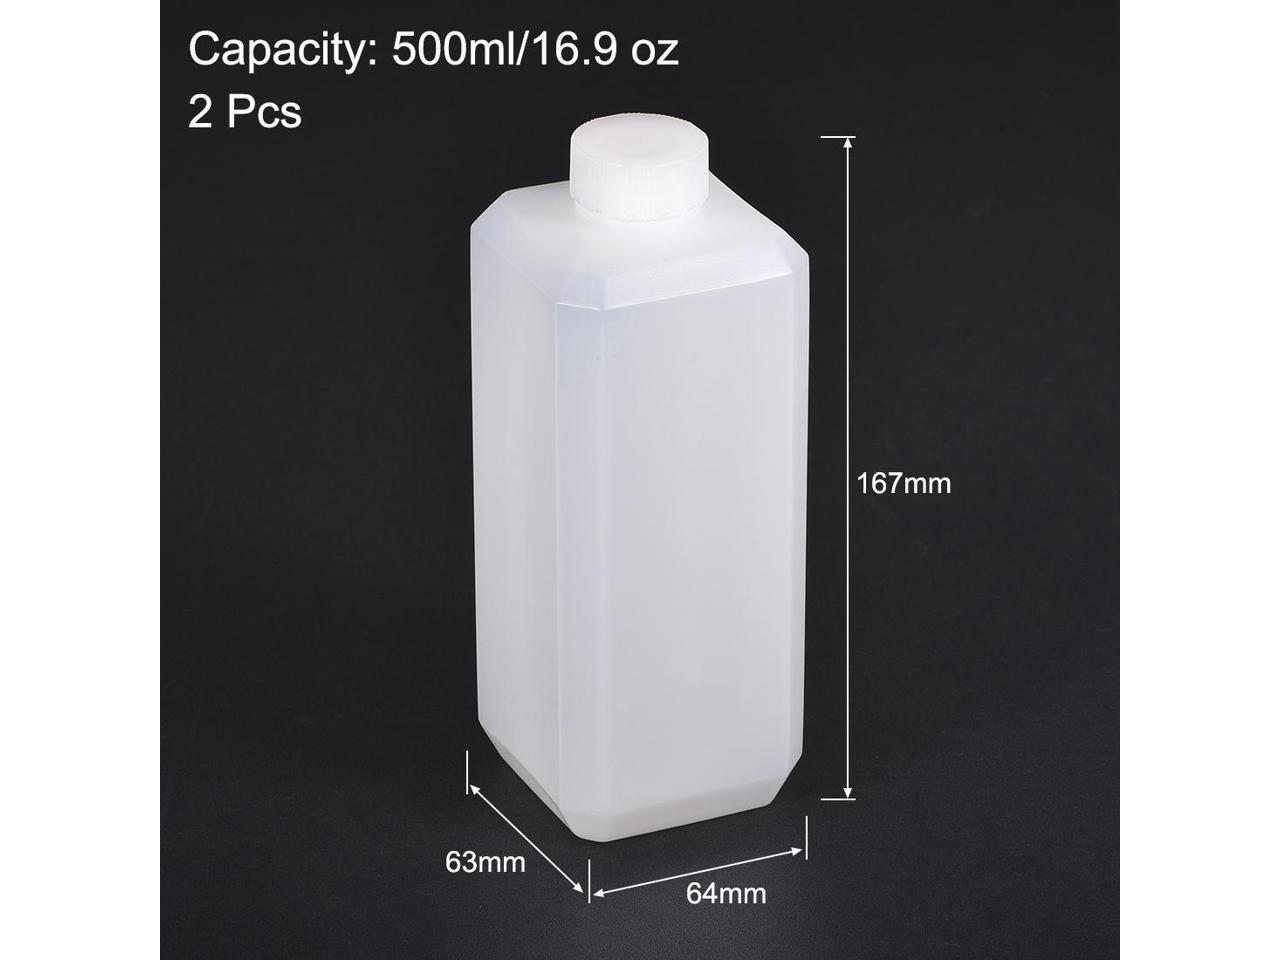 Bettomshin 5Pcs Plastic Lab Bottle 500ml Wide Mouth Sample Sealing Storage Container White Blue Translucent Square w Tamper Evident Cap Translucent 